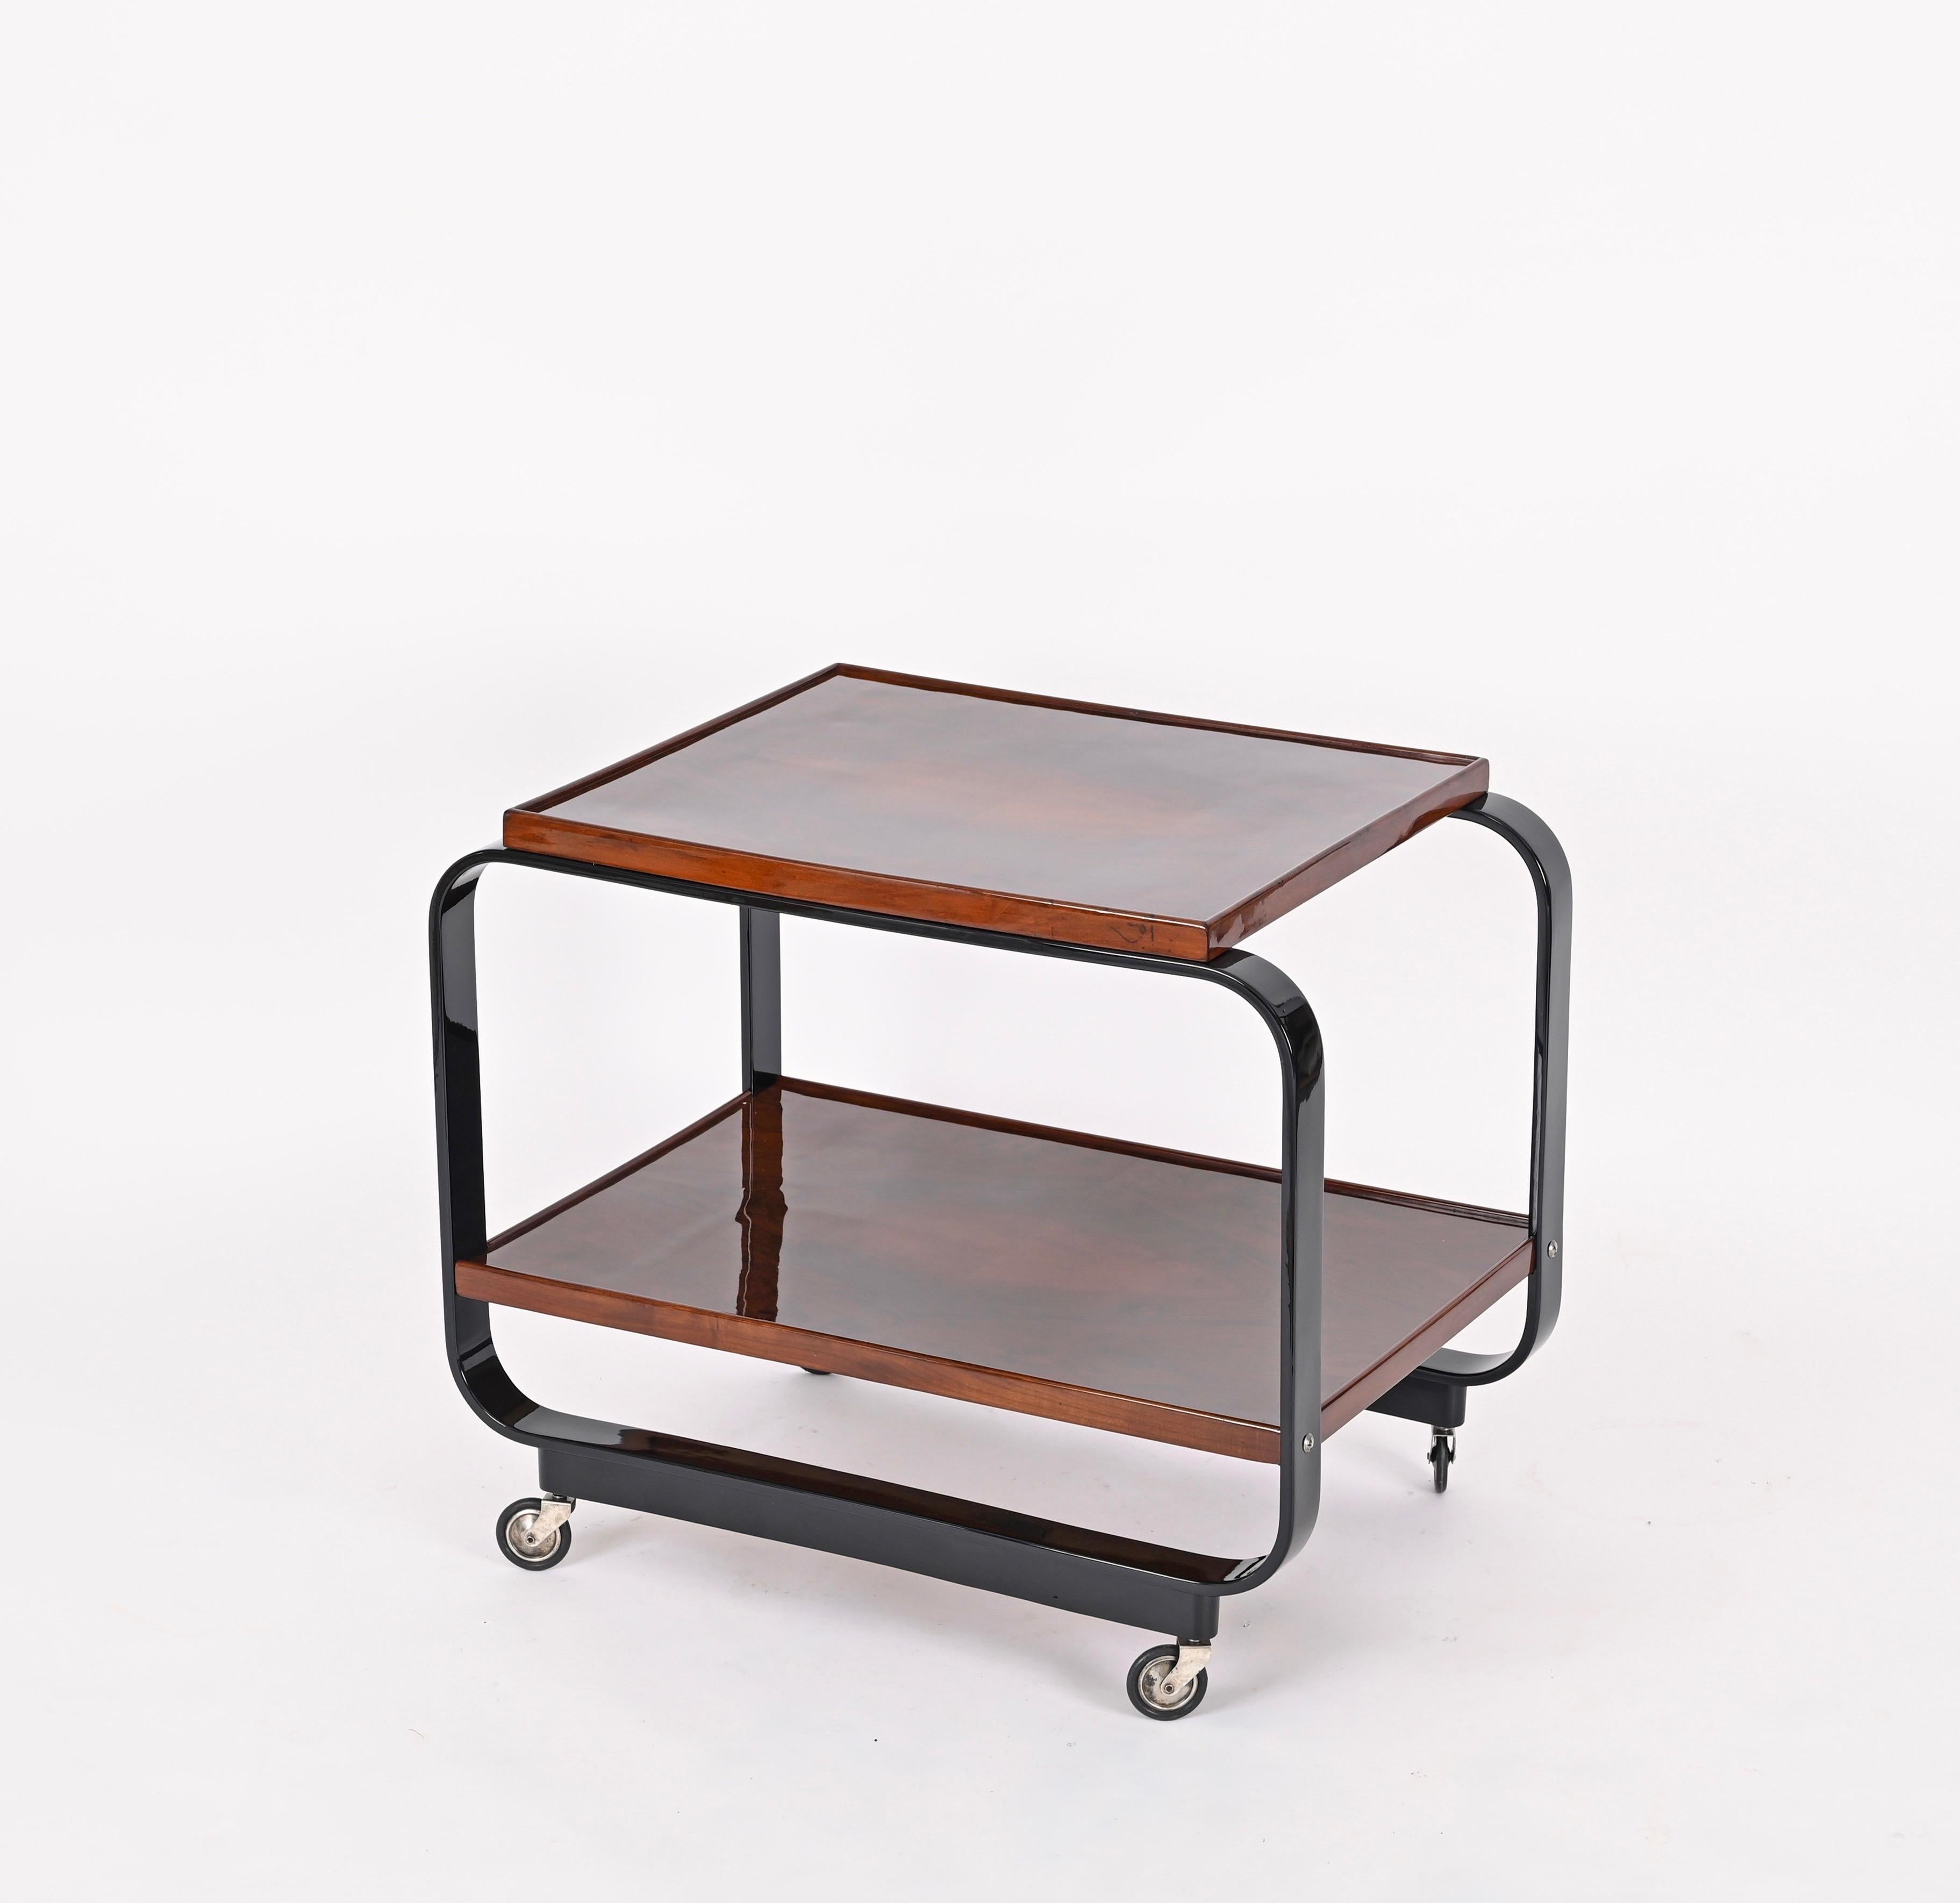 Serving Bar Cart by Gino Maggioni Signed, Bent Curly Walnut Wood, Italy, 1930s For Sale 1